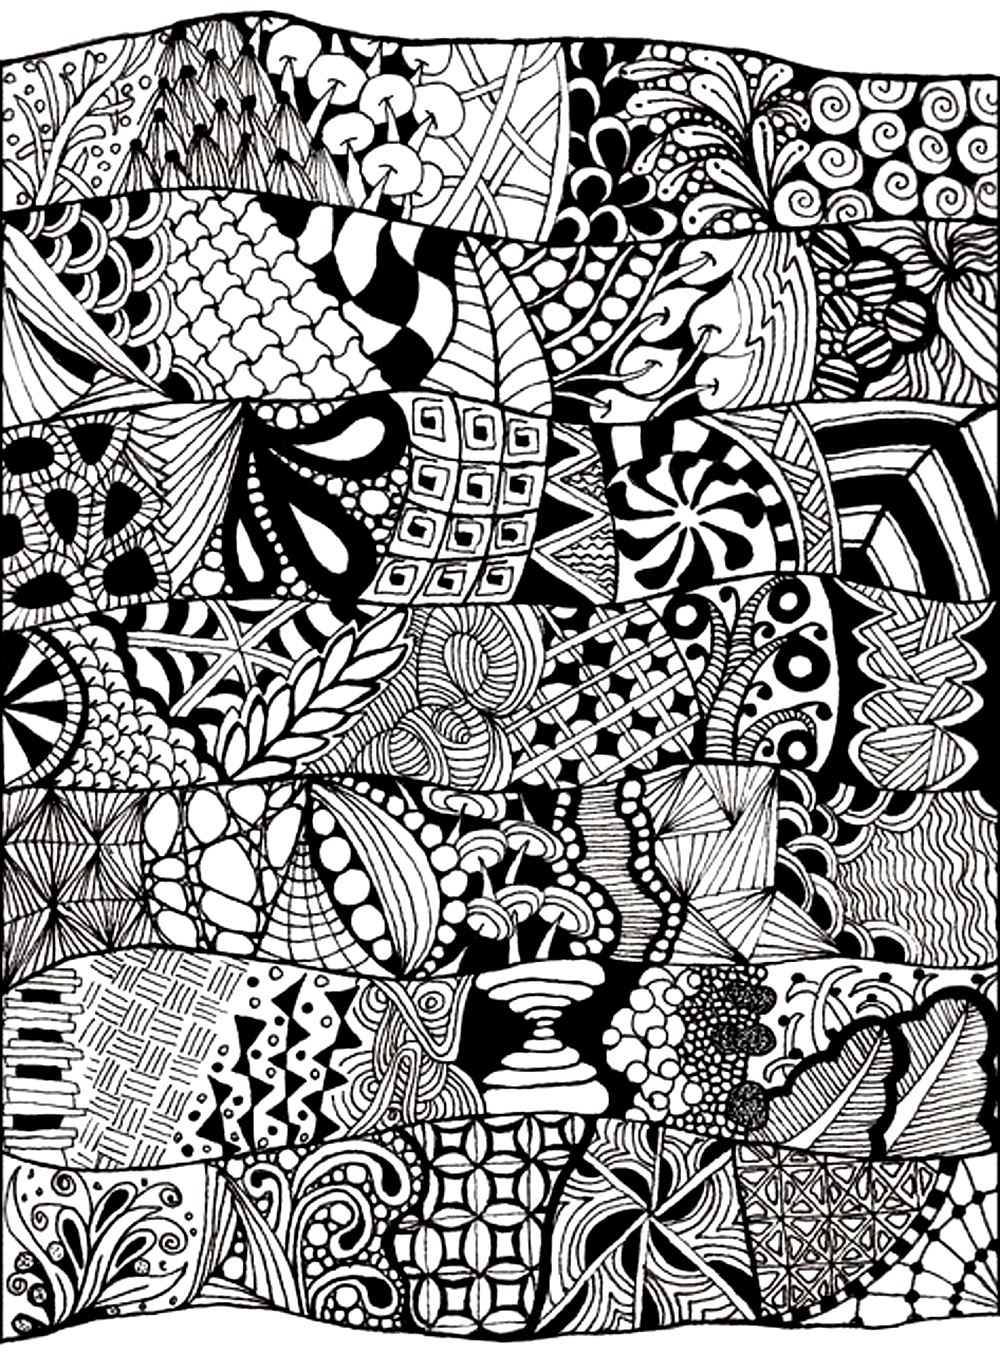 Zen anti stress abstract to print - Anti stress Adult Coloring Pages ...